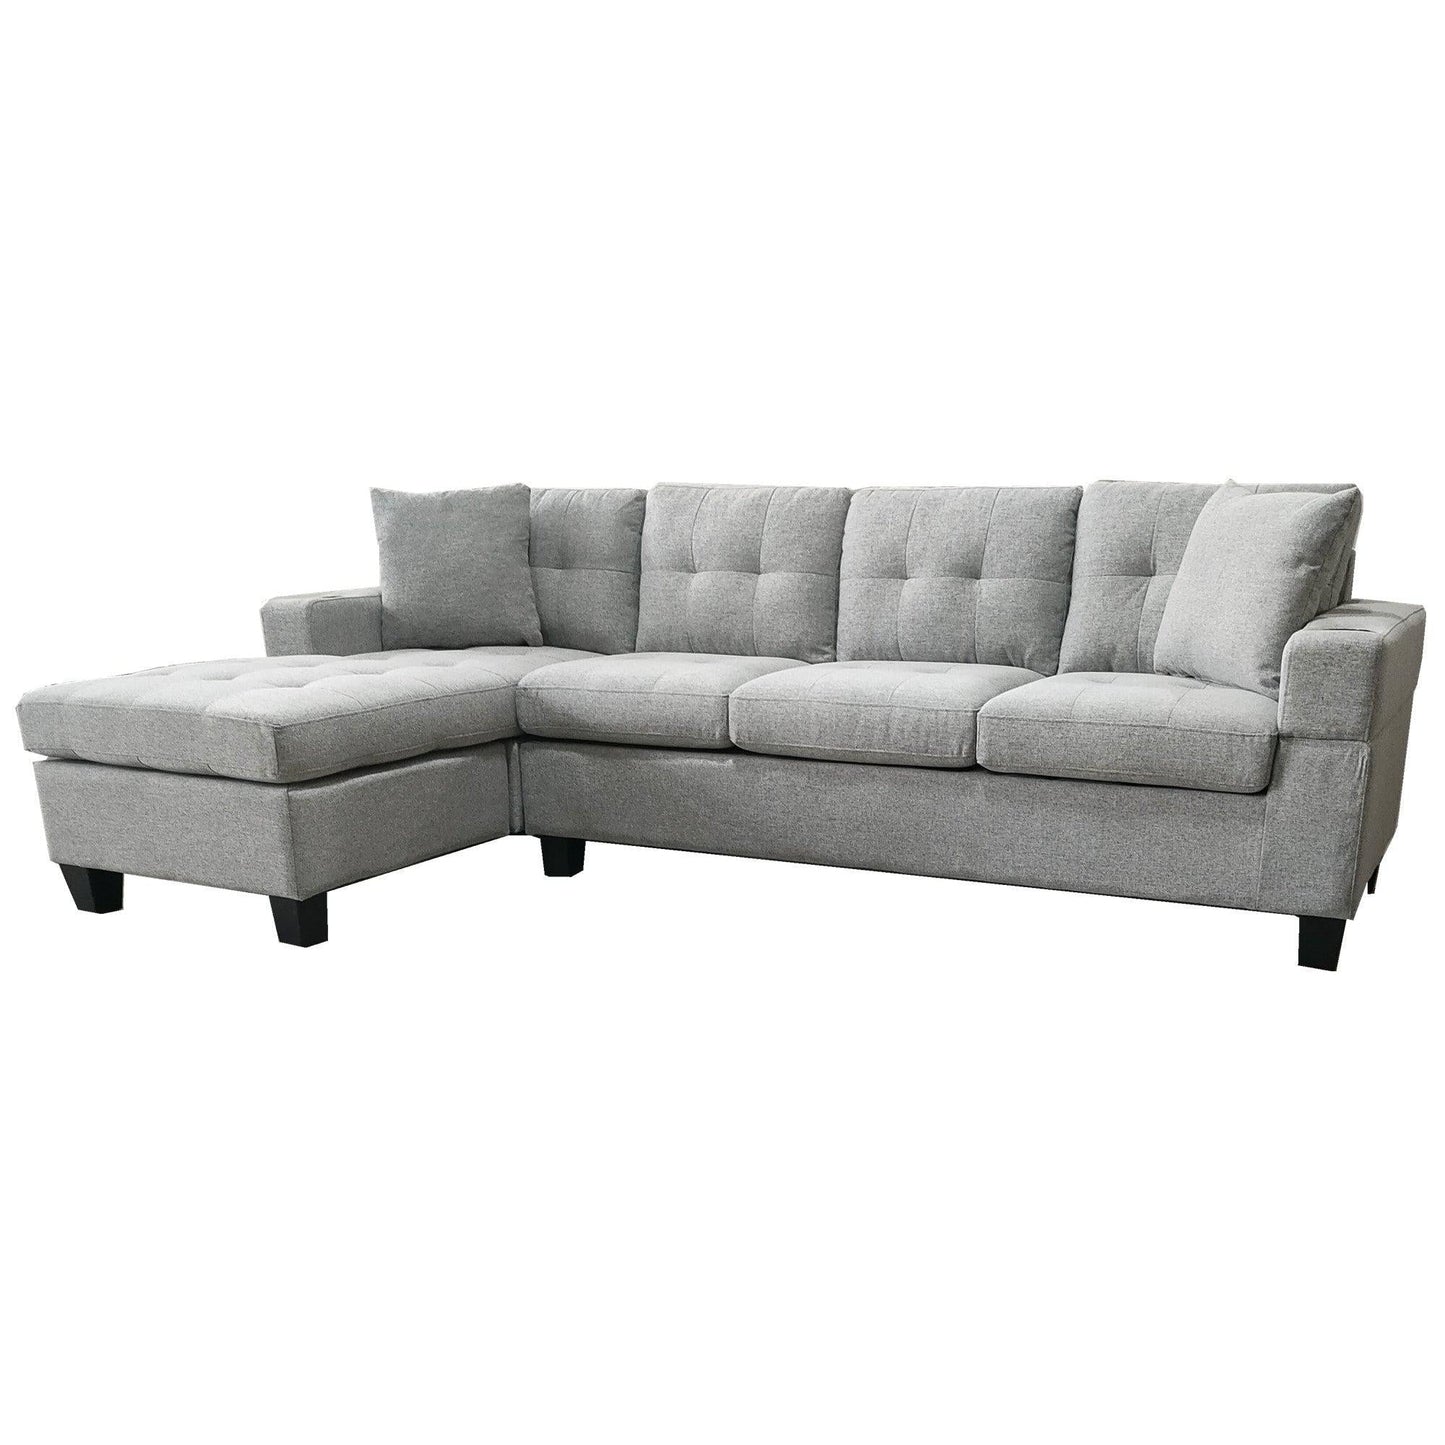 MONTANA REVERSIBLE SOFA COUCH SUITE MODULAR CORNER 4 SEATER SET SECTIONAL - LIGH